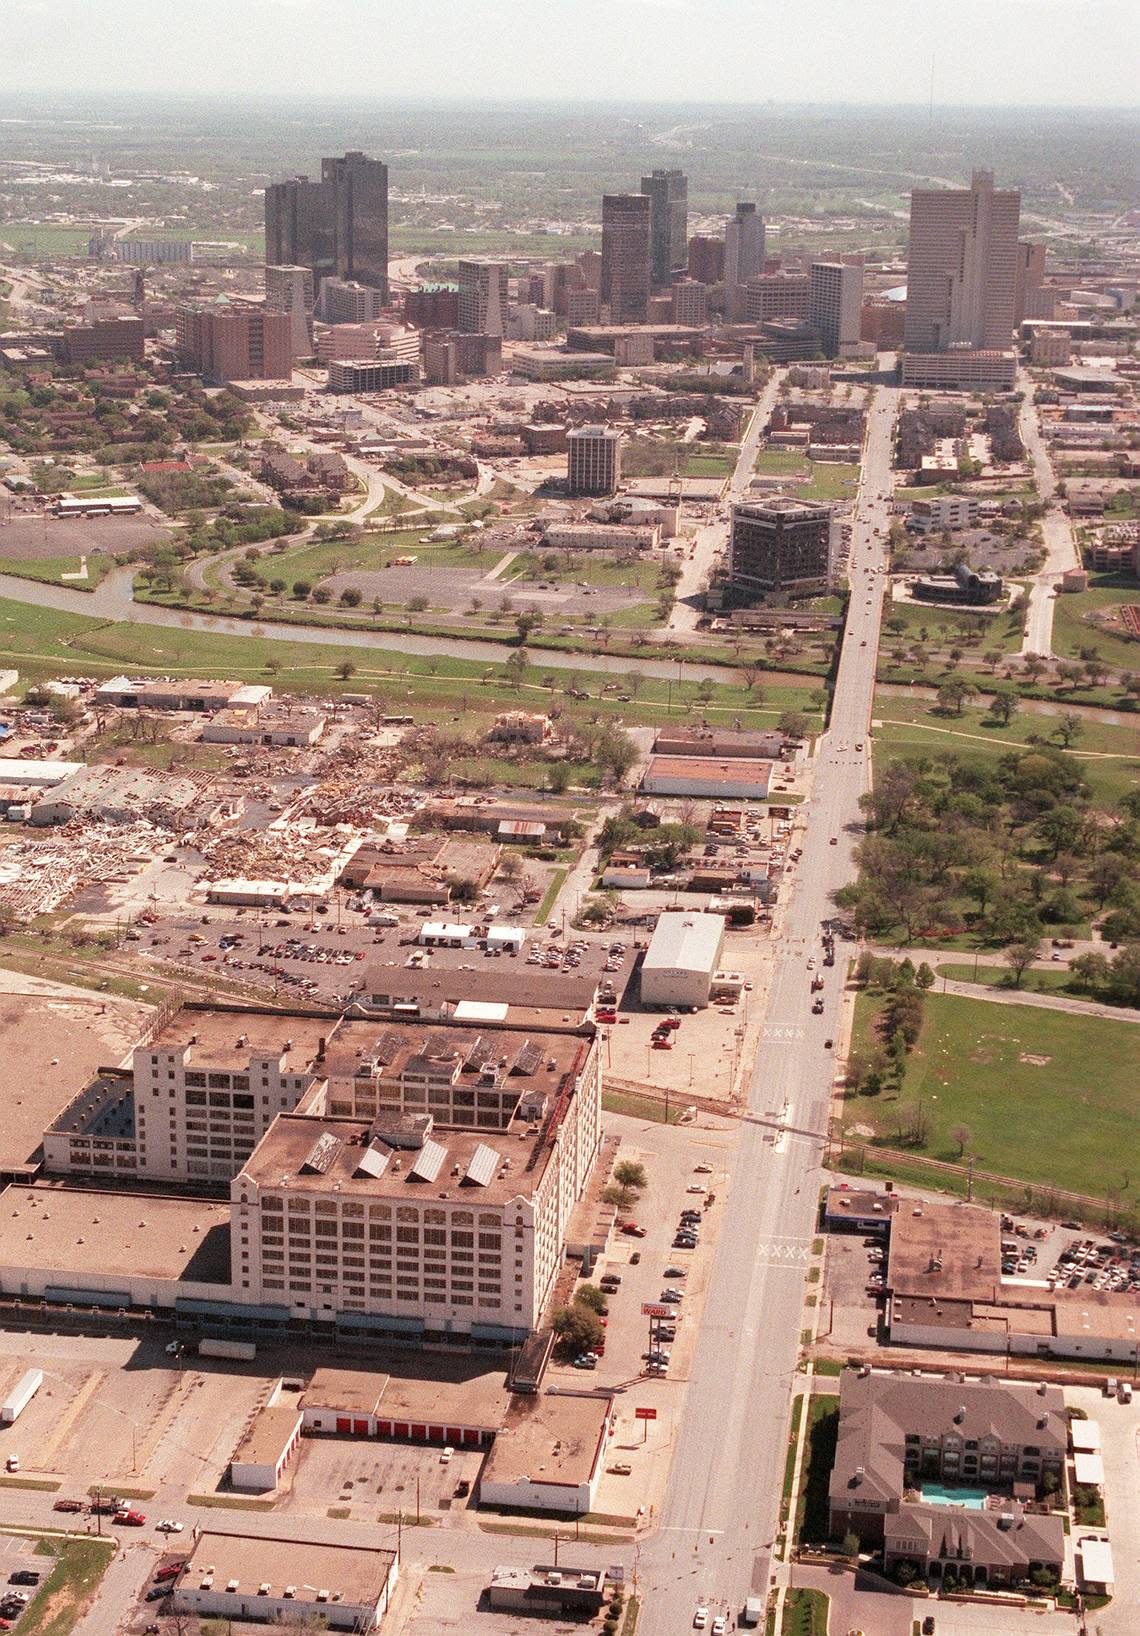 The March 28, 2000 tornado moved roughly along the north side of West 7th Street from the old Montgomery Ward building (now Montgomery Plaza) into downtown Fort Worth.